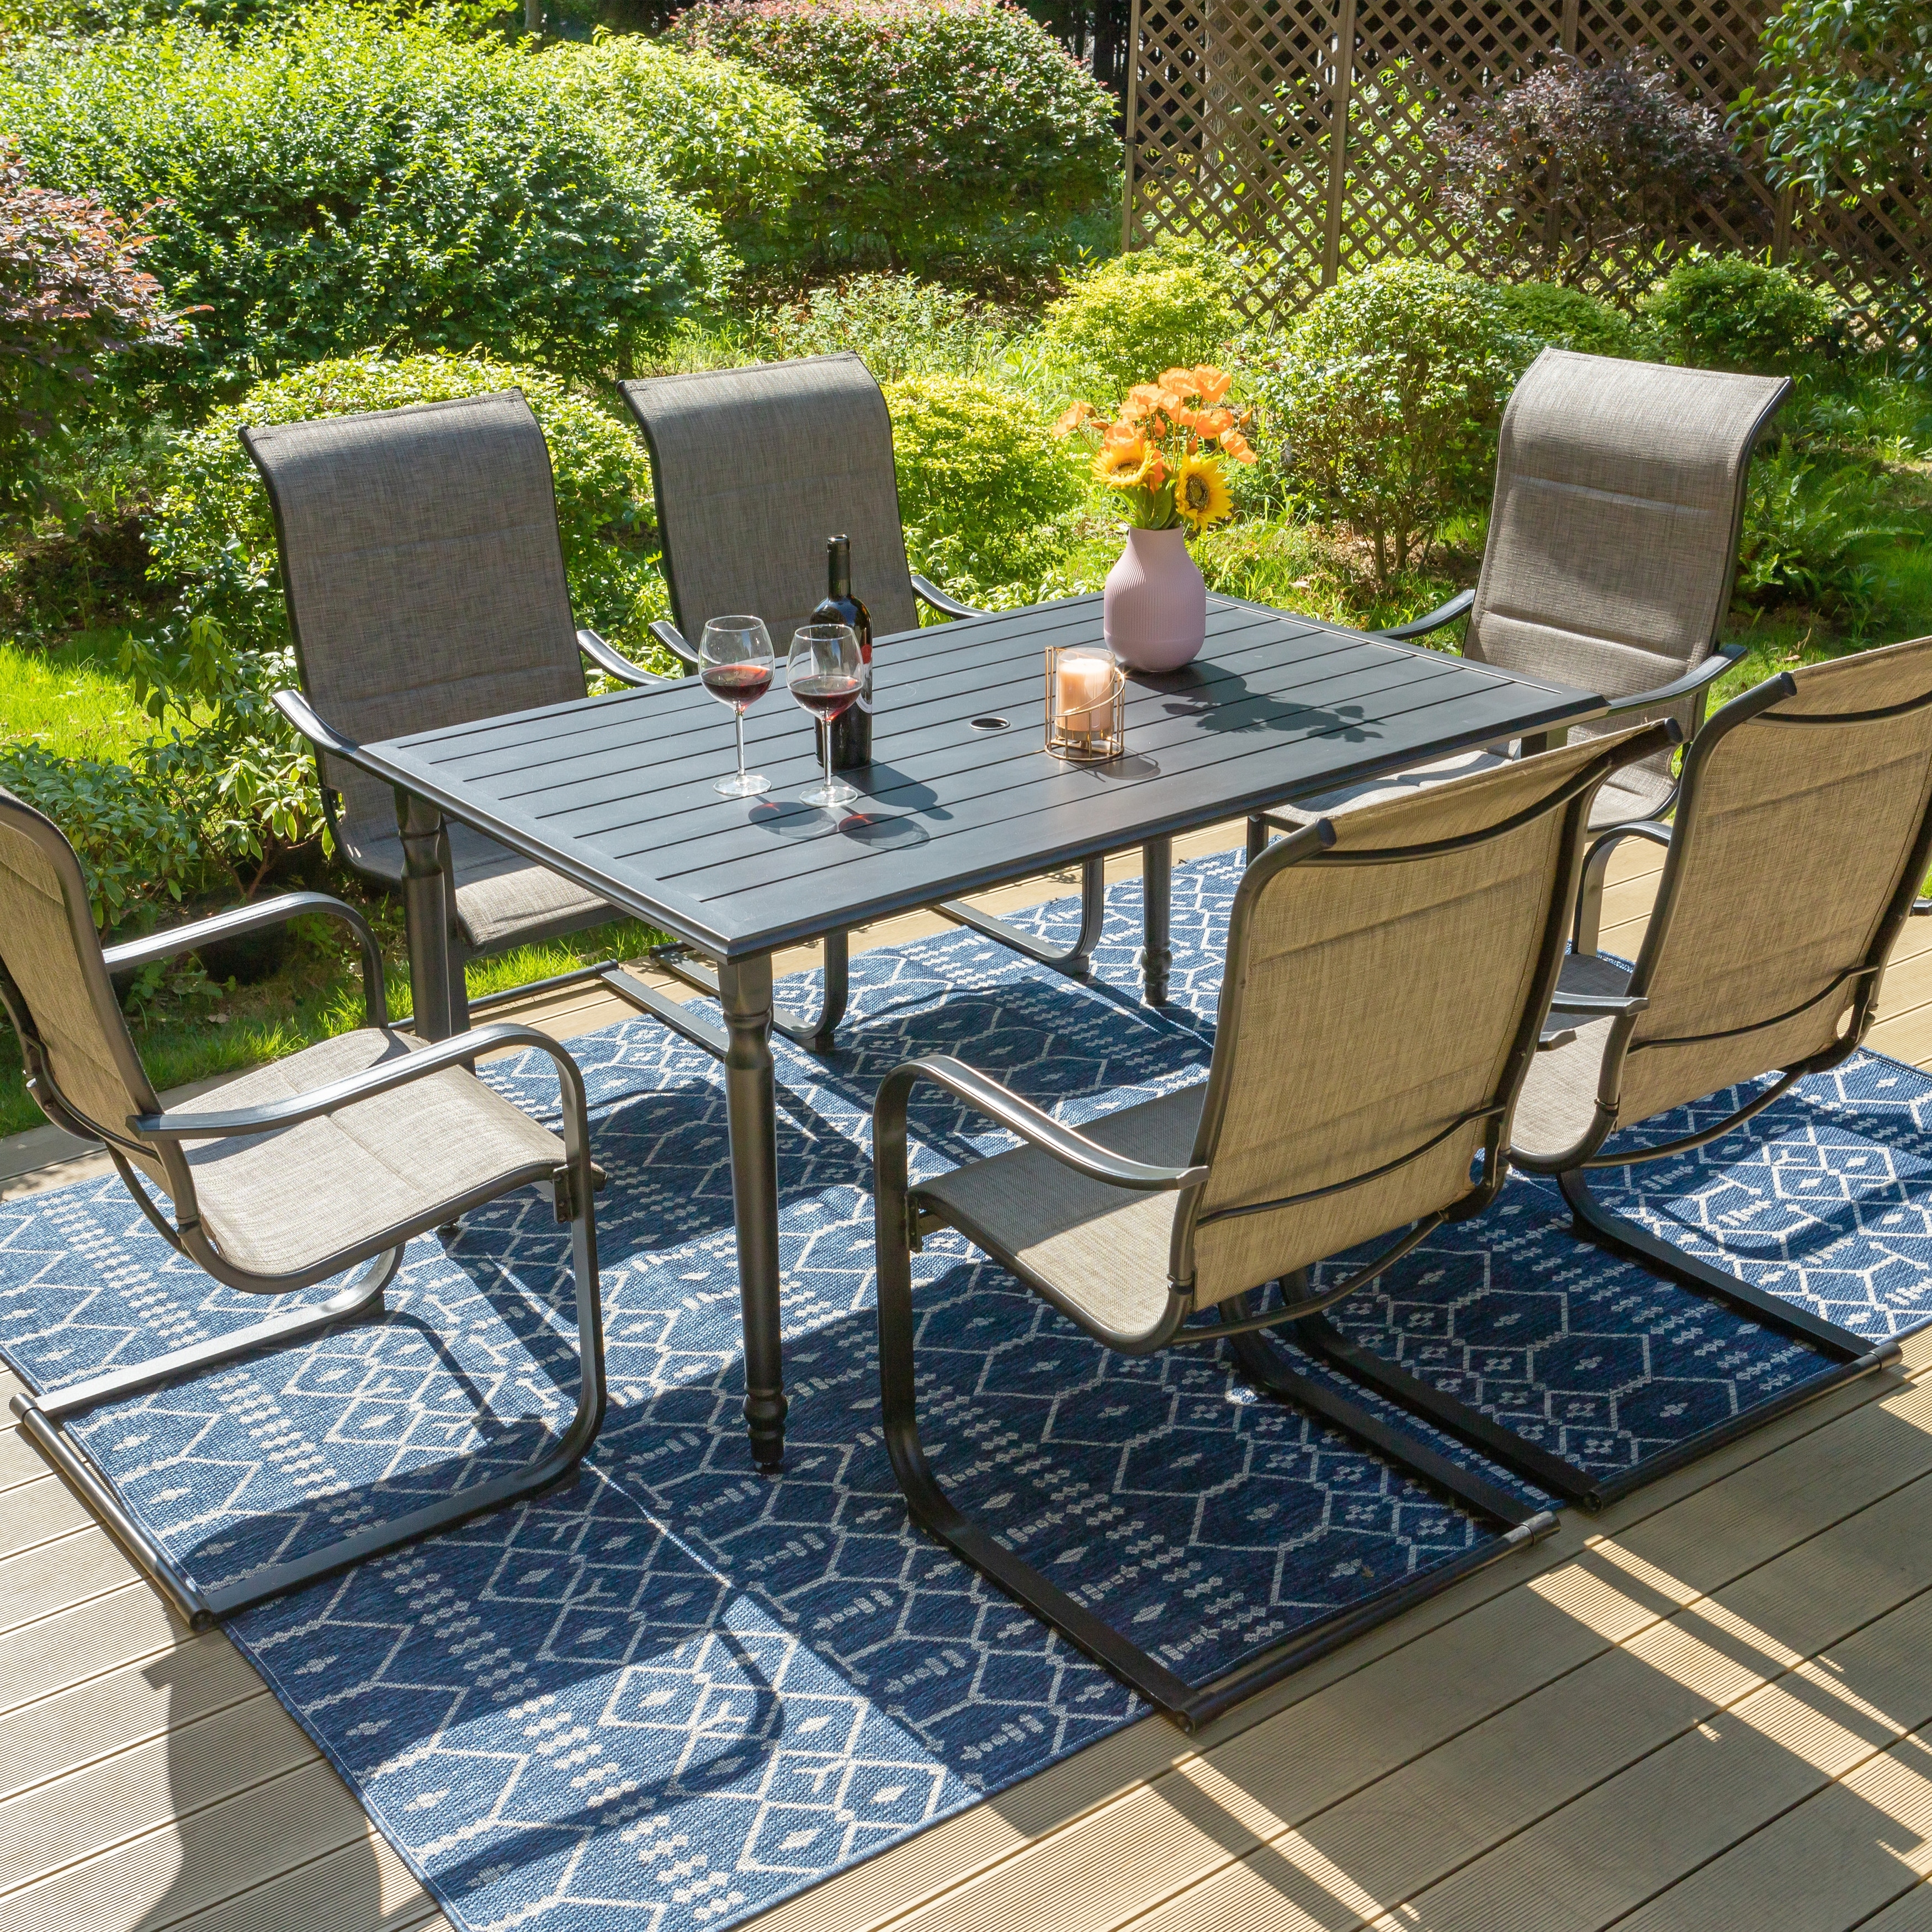 7-piece Patio Dining Sets   6 Textilene Fabirc Chairs And 1 Metal Table With Umbrella Hole